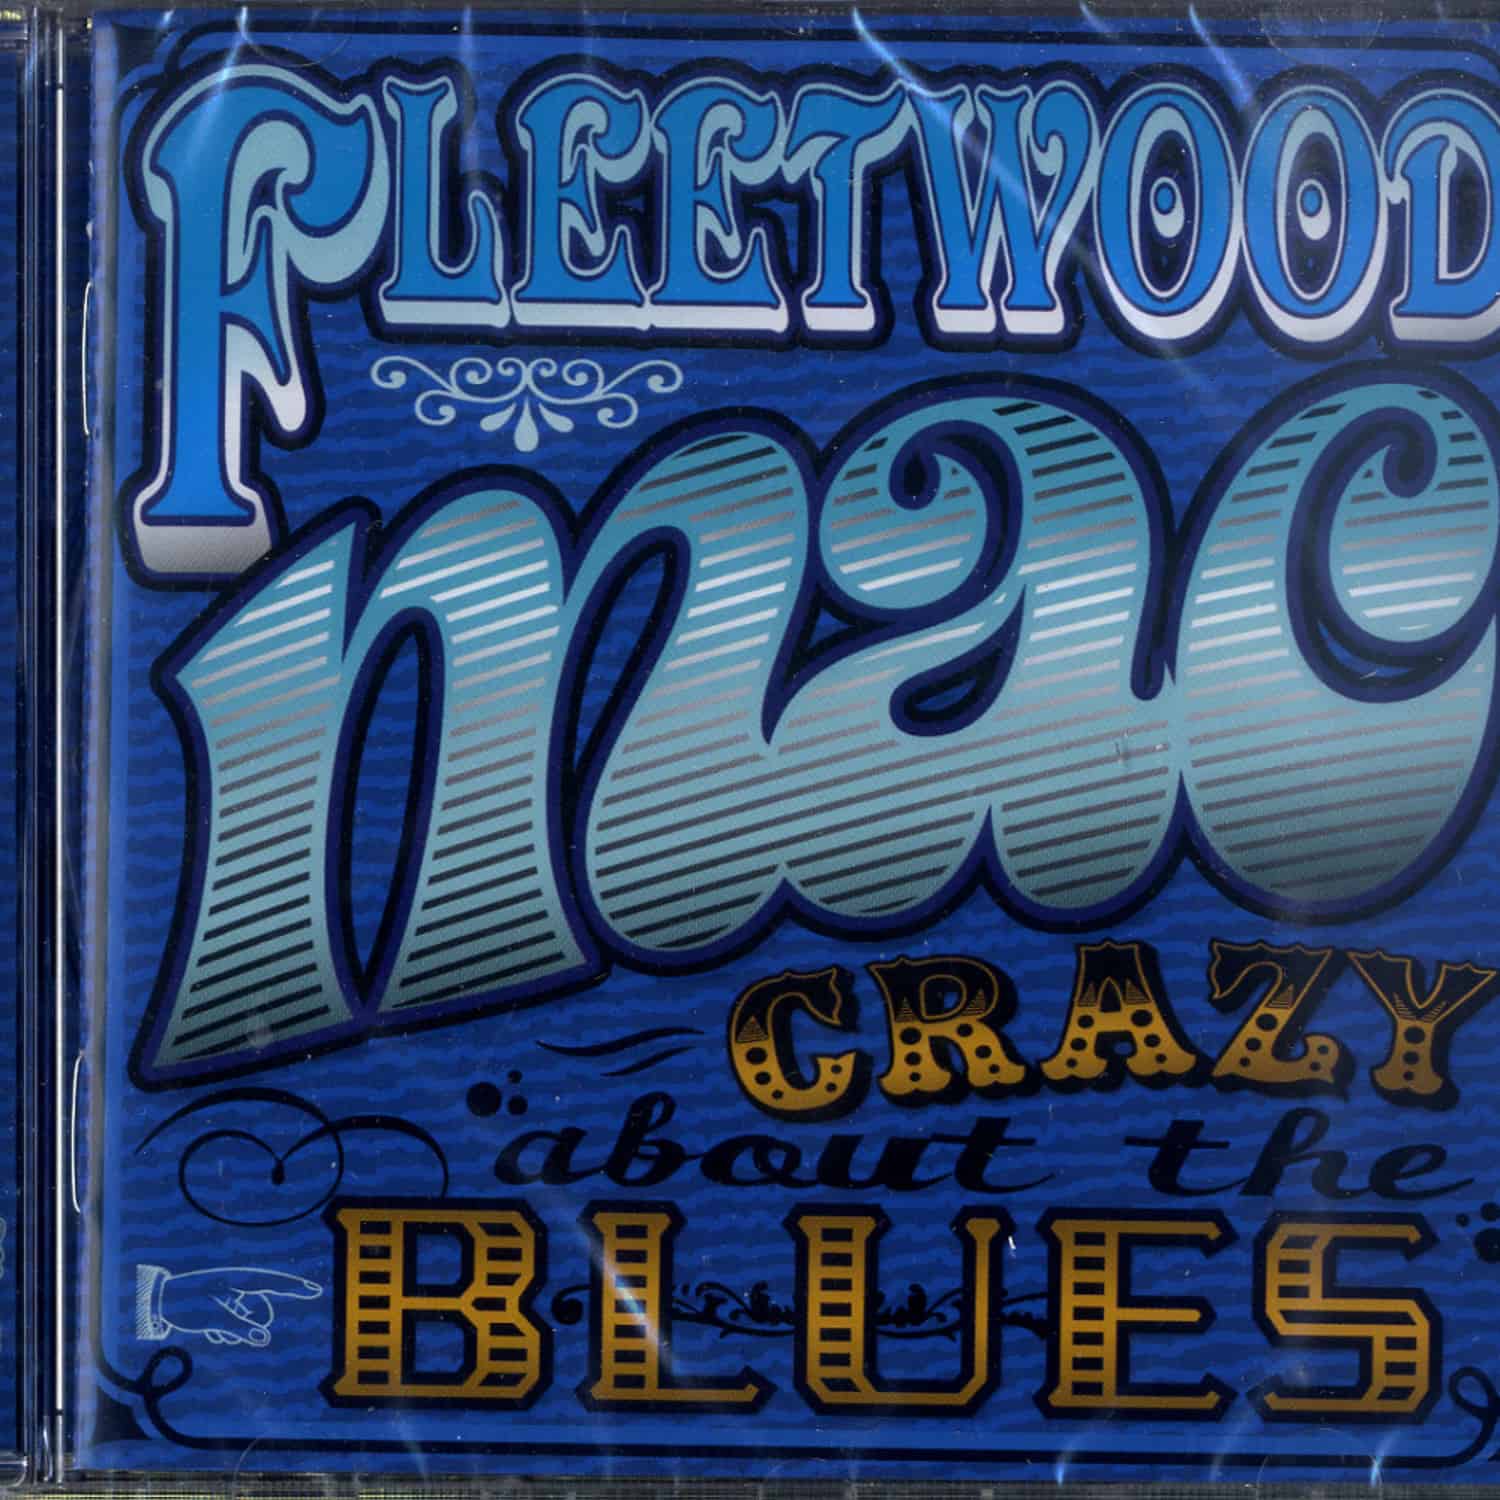 Fleetwood Mac - CRAZY ABOUT THE BLUES 